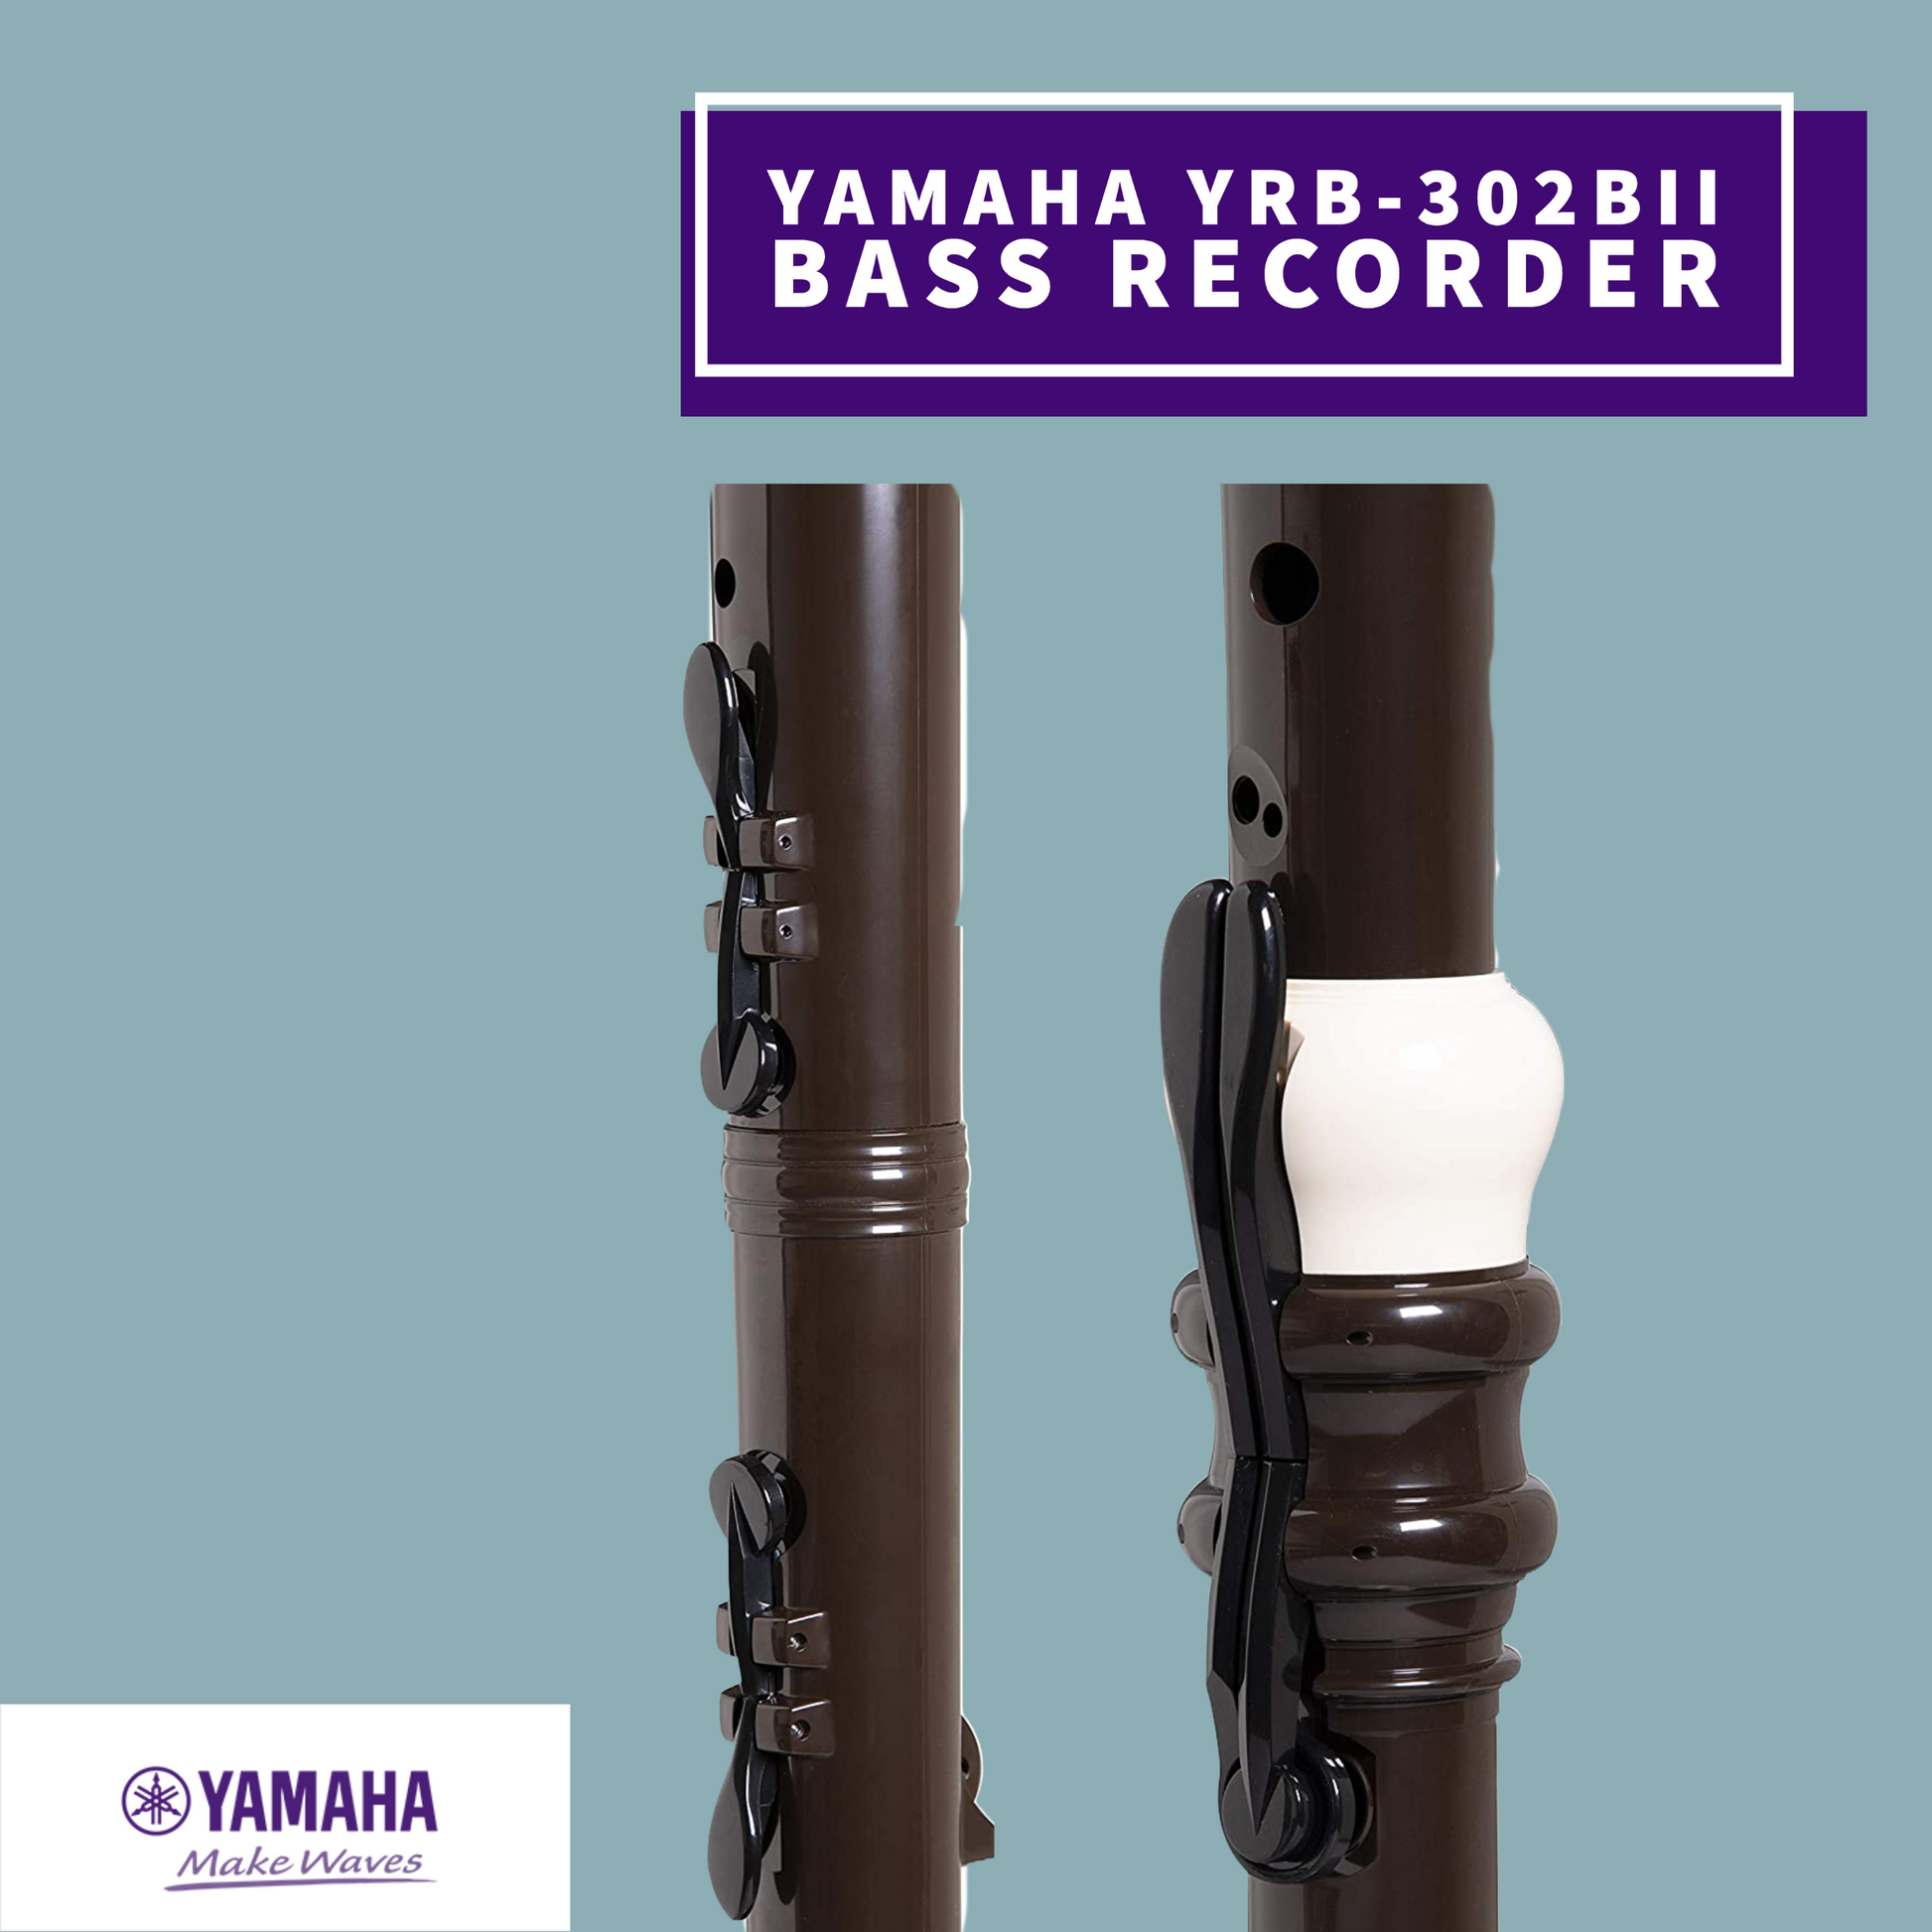 Yamaha Yrb-302Bii 4 Piece Abs Resin Bass Recorder (Key Of F) Musical Instruments & Accessories